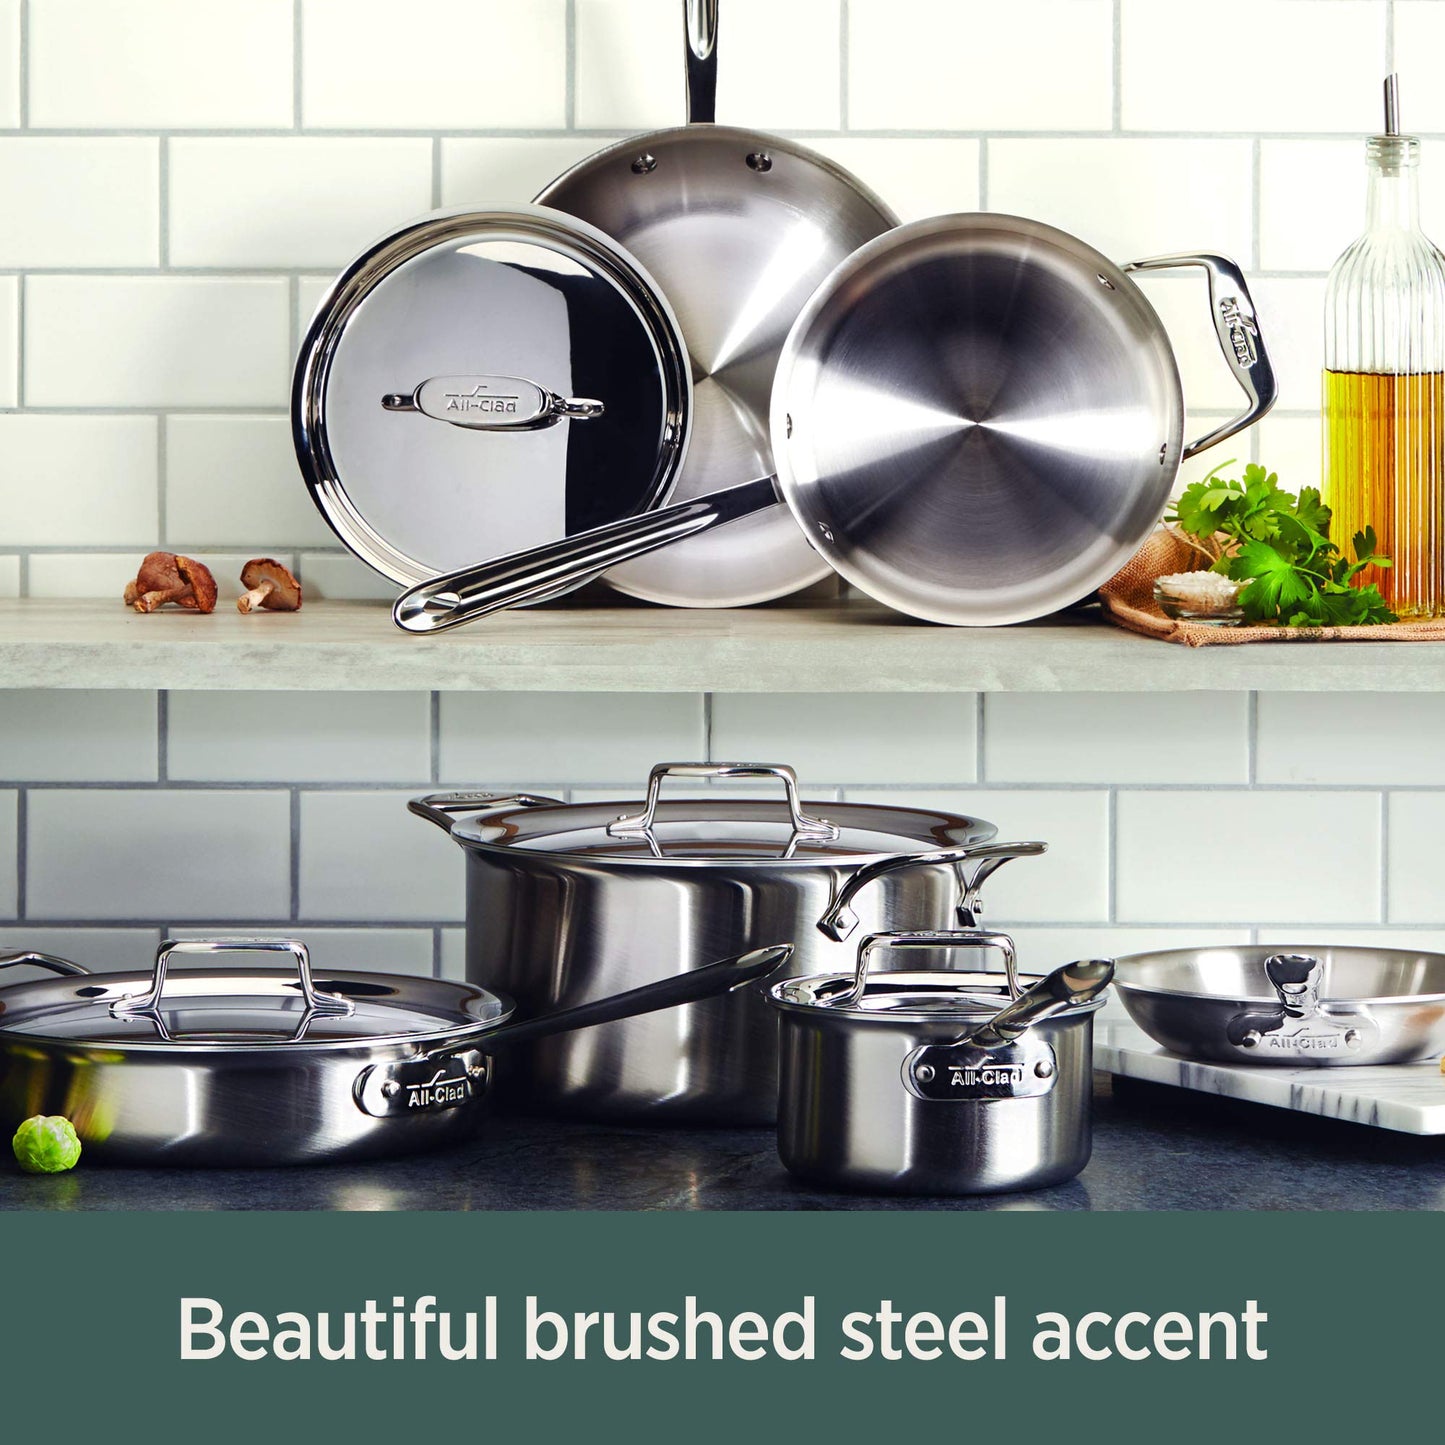 All-Clad D5 5-Ply Brushed Stainless Steel Cookware Set 14 Piece Induction Oven Broiler Safe 600F Pots and Pans Silver